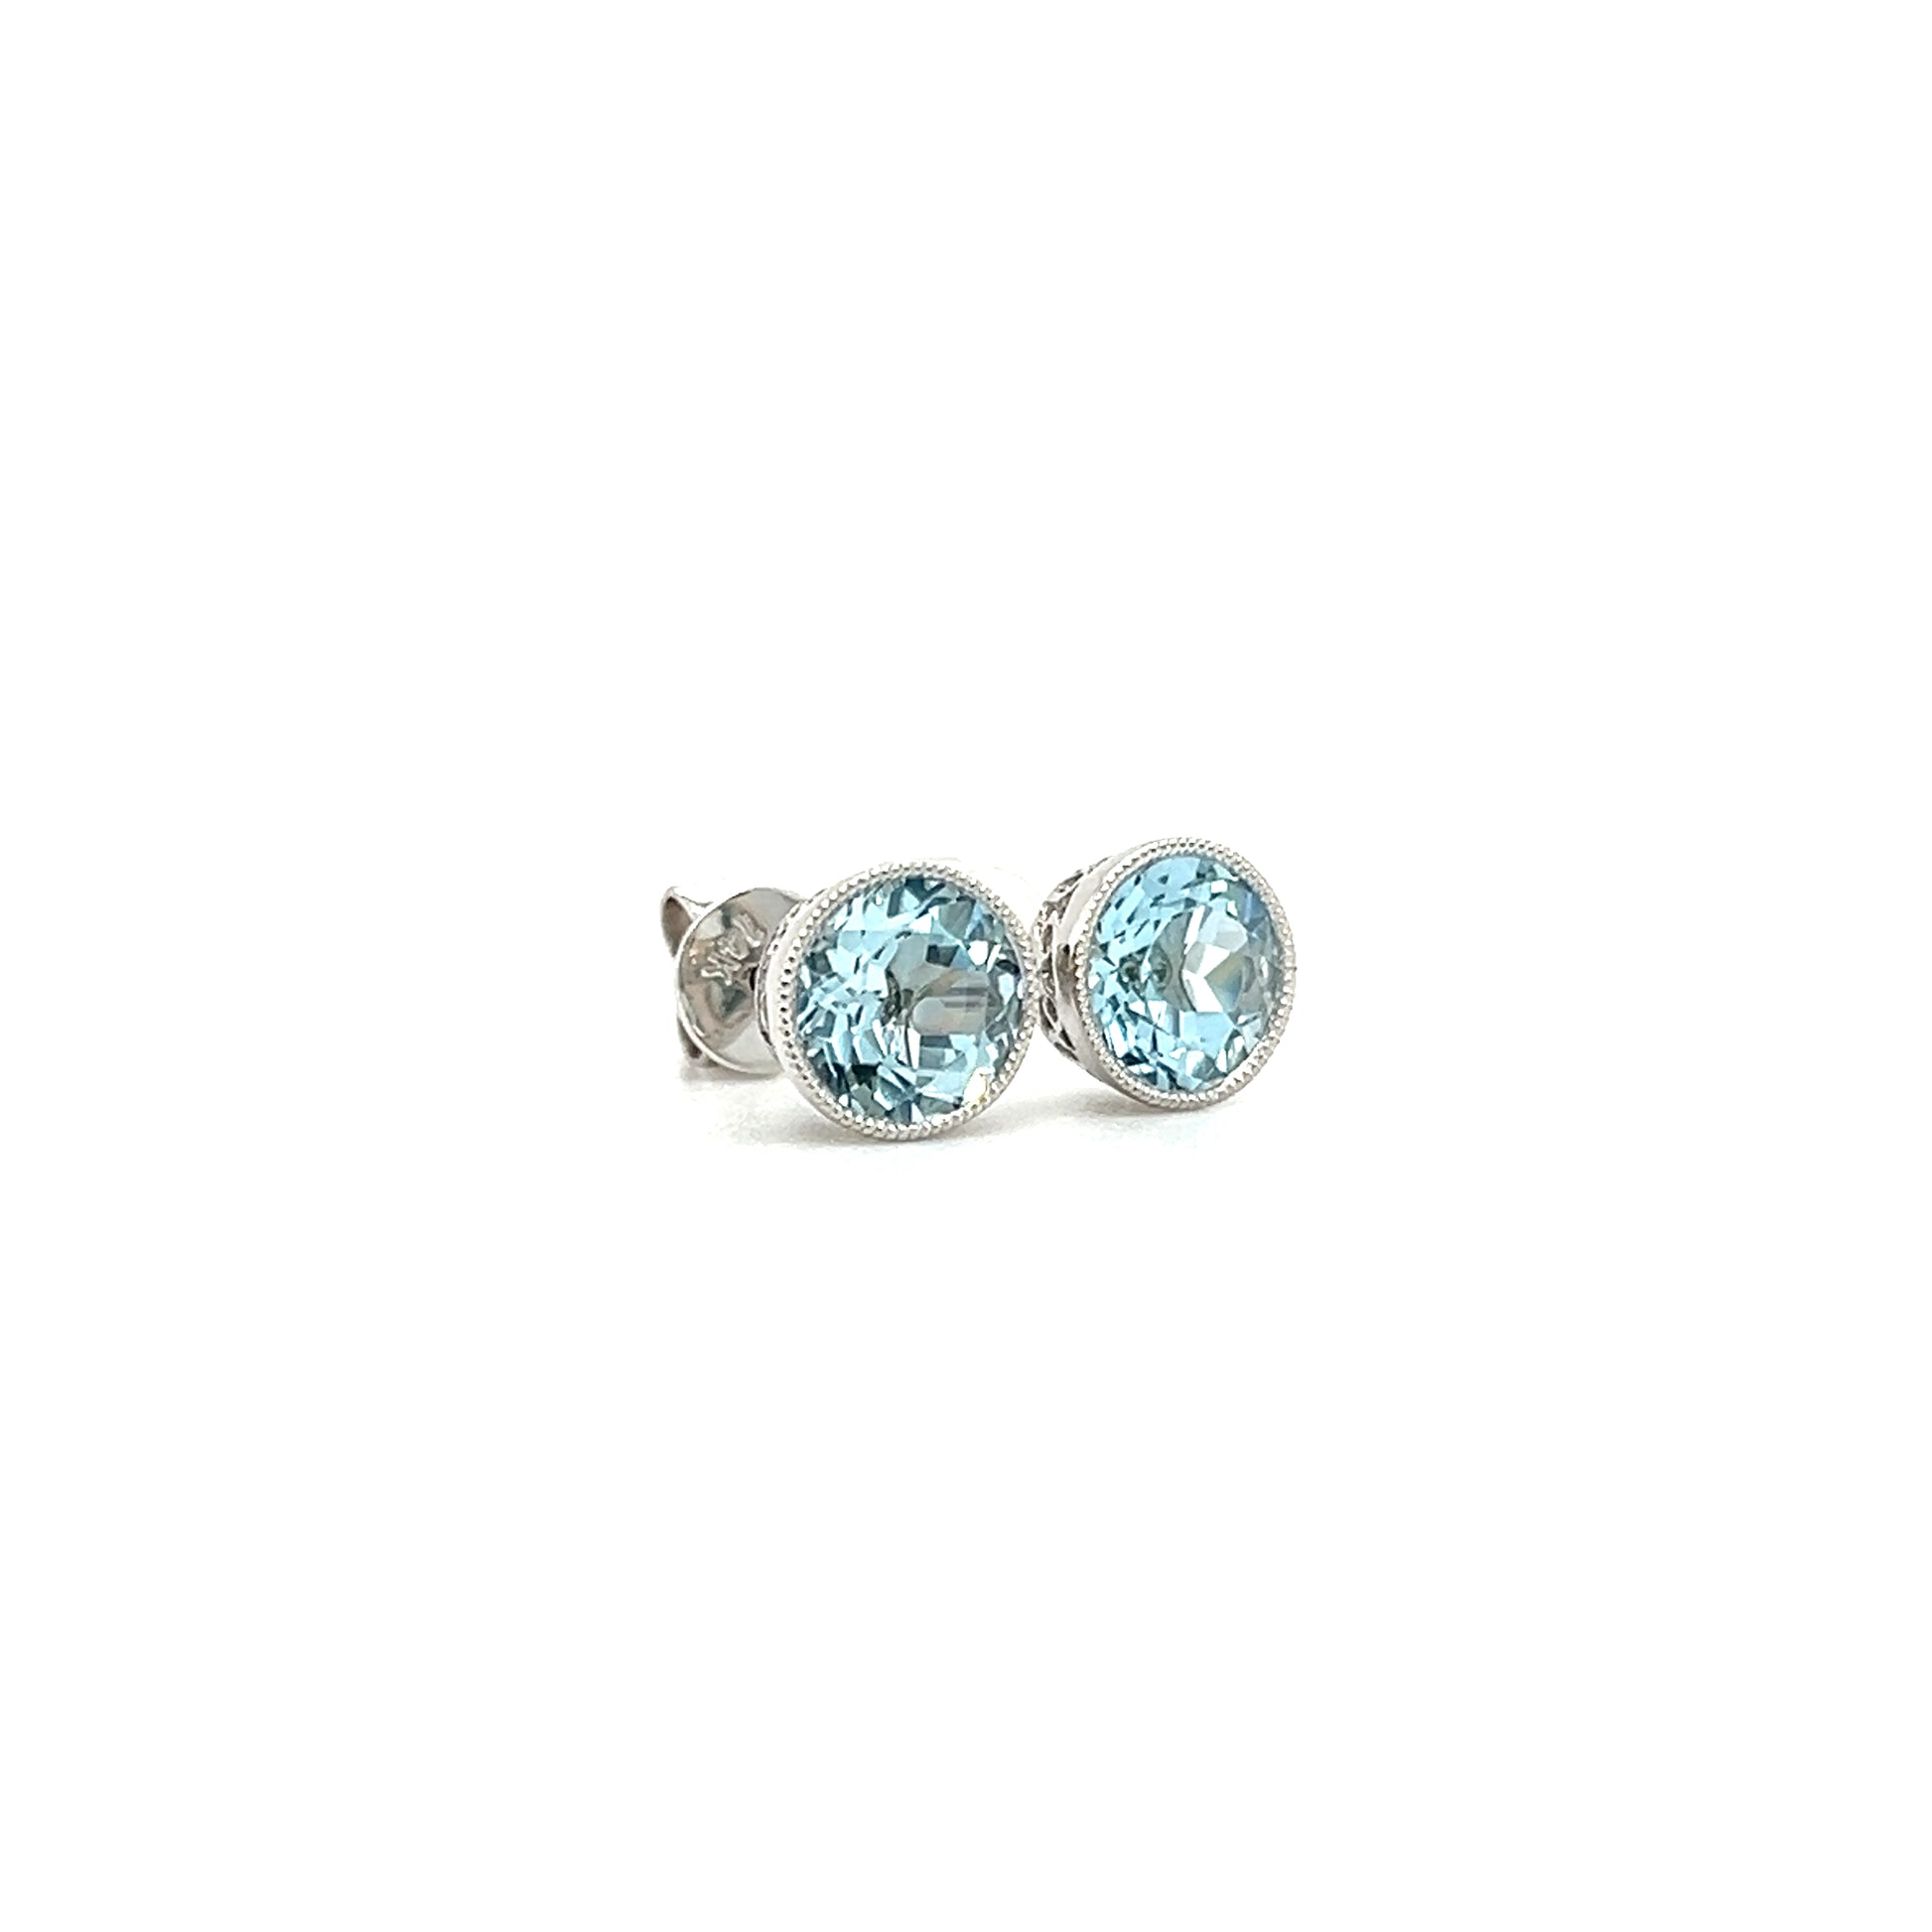 Aquamarine Stud Earrings with Filigree and Milgrain Details in 14K White Gold Left Side View